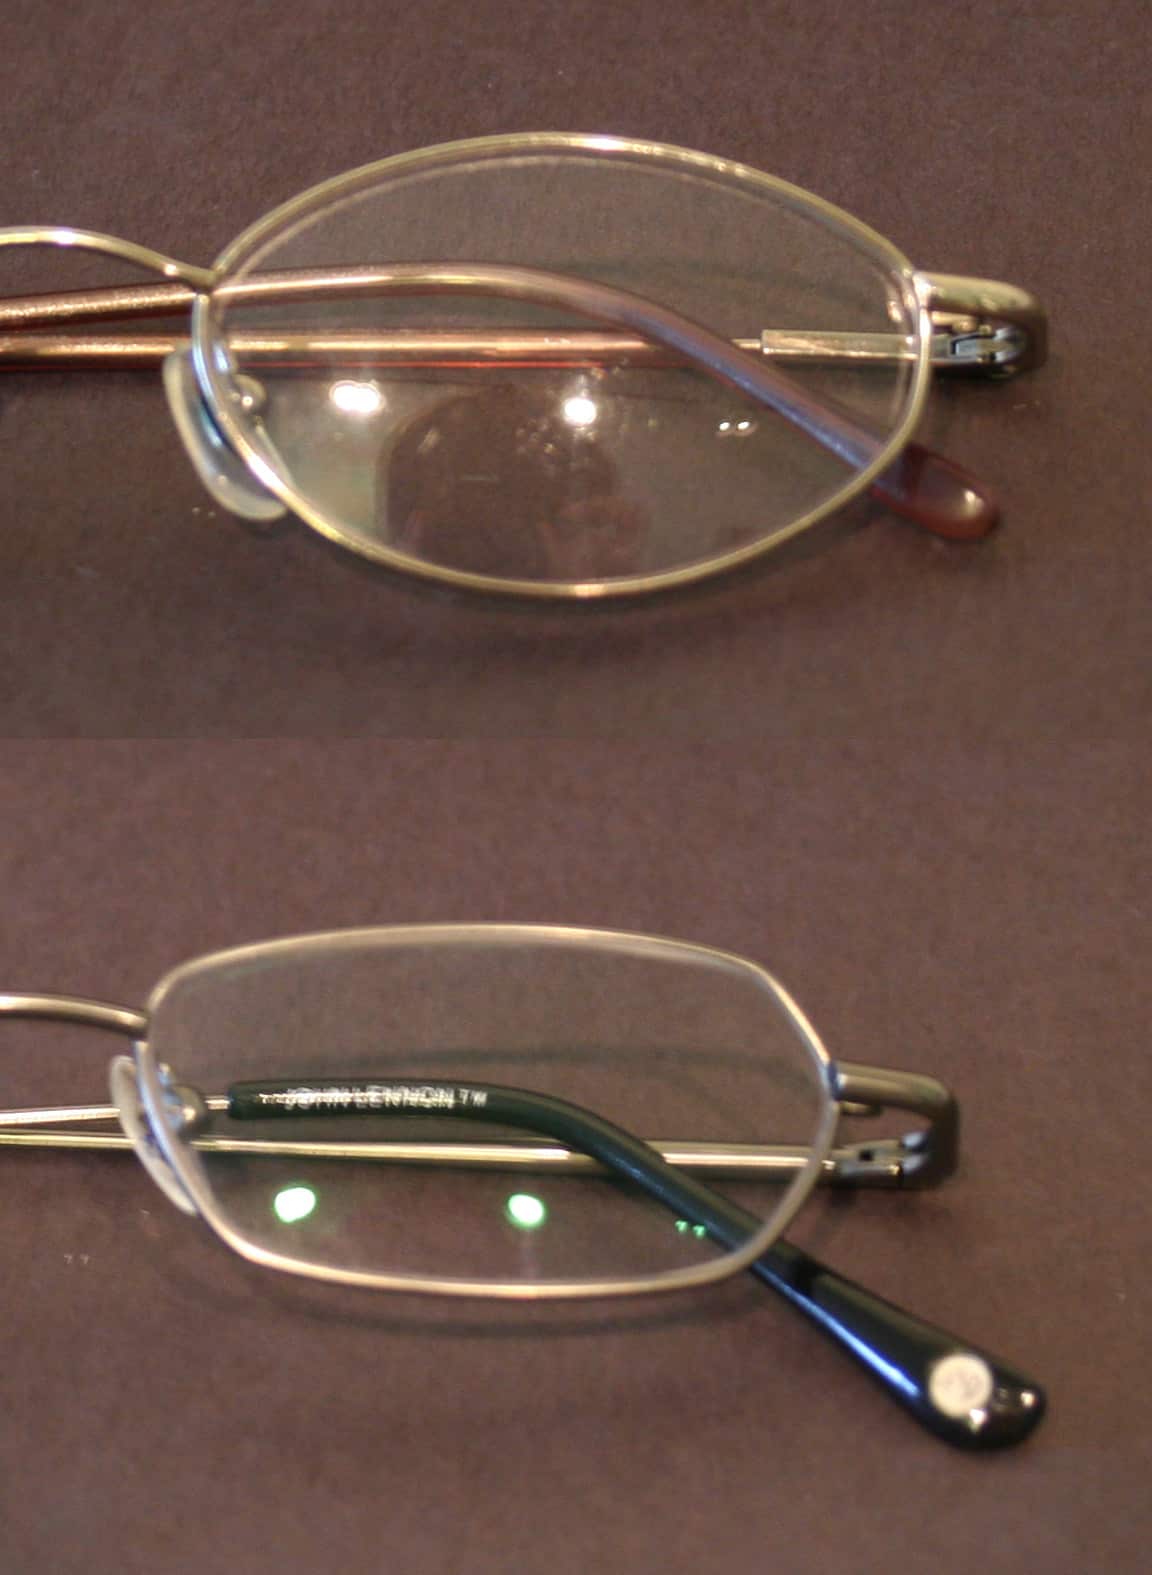 Comparison of spectacles with and without anti-reflection coating